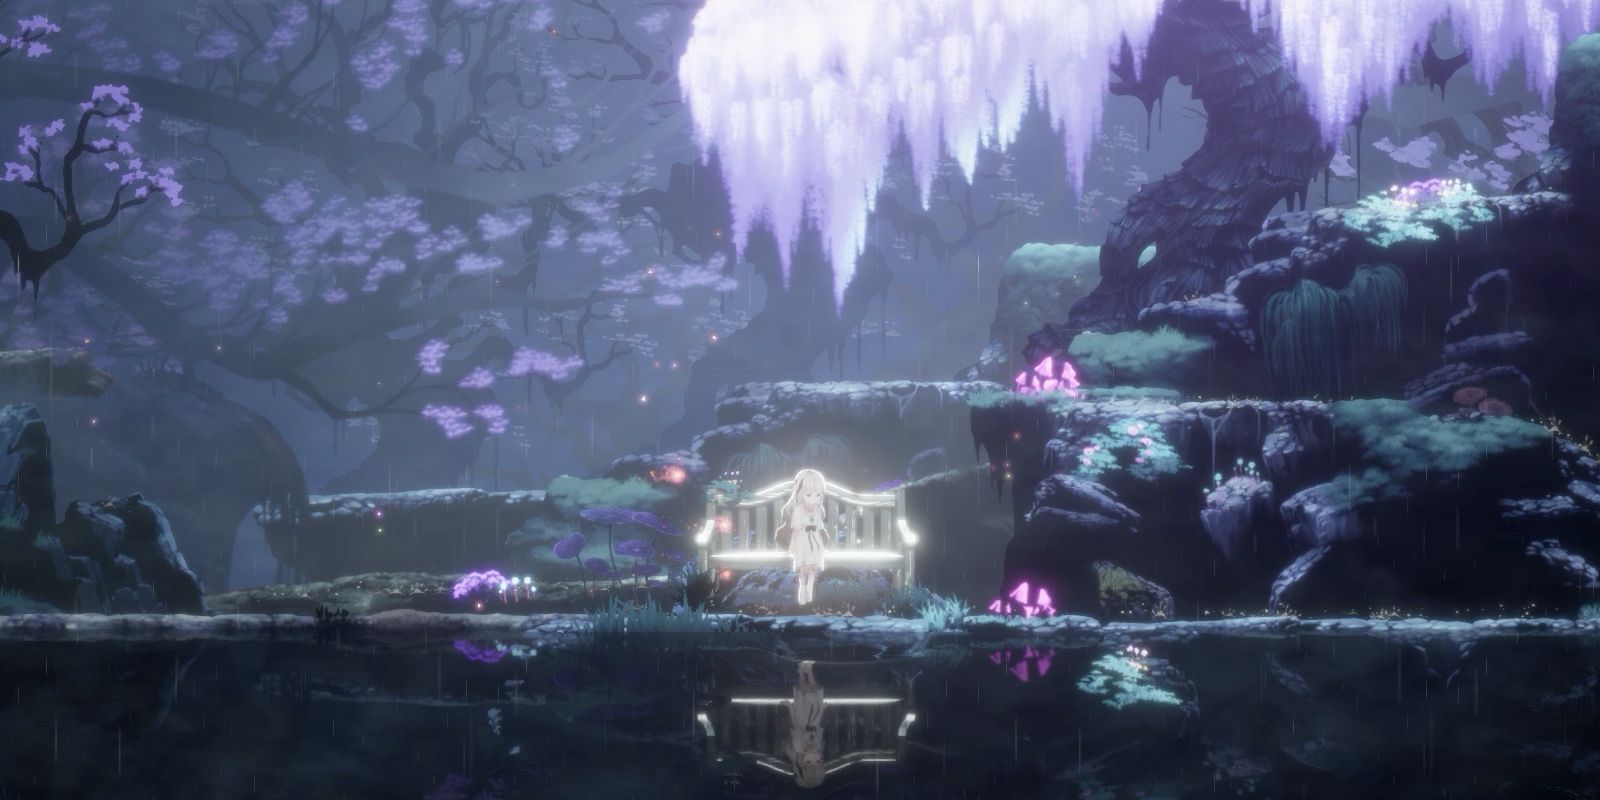 News - Excellent Metroidvania 'Ender Lilies' Is Getting A Physical Release  in Europe on Jan 11th